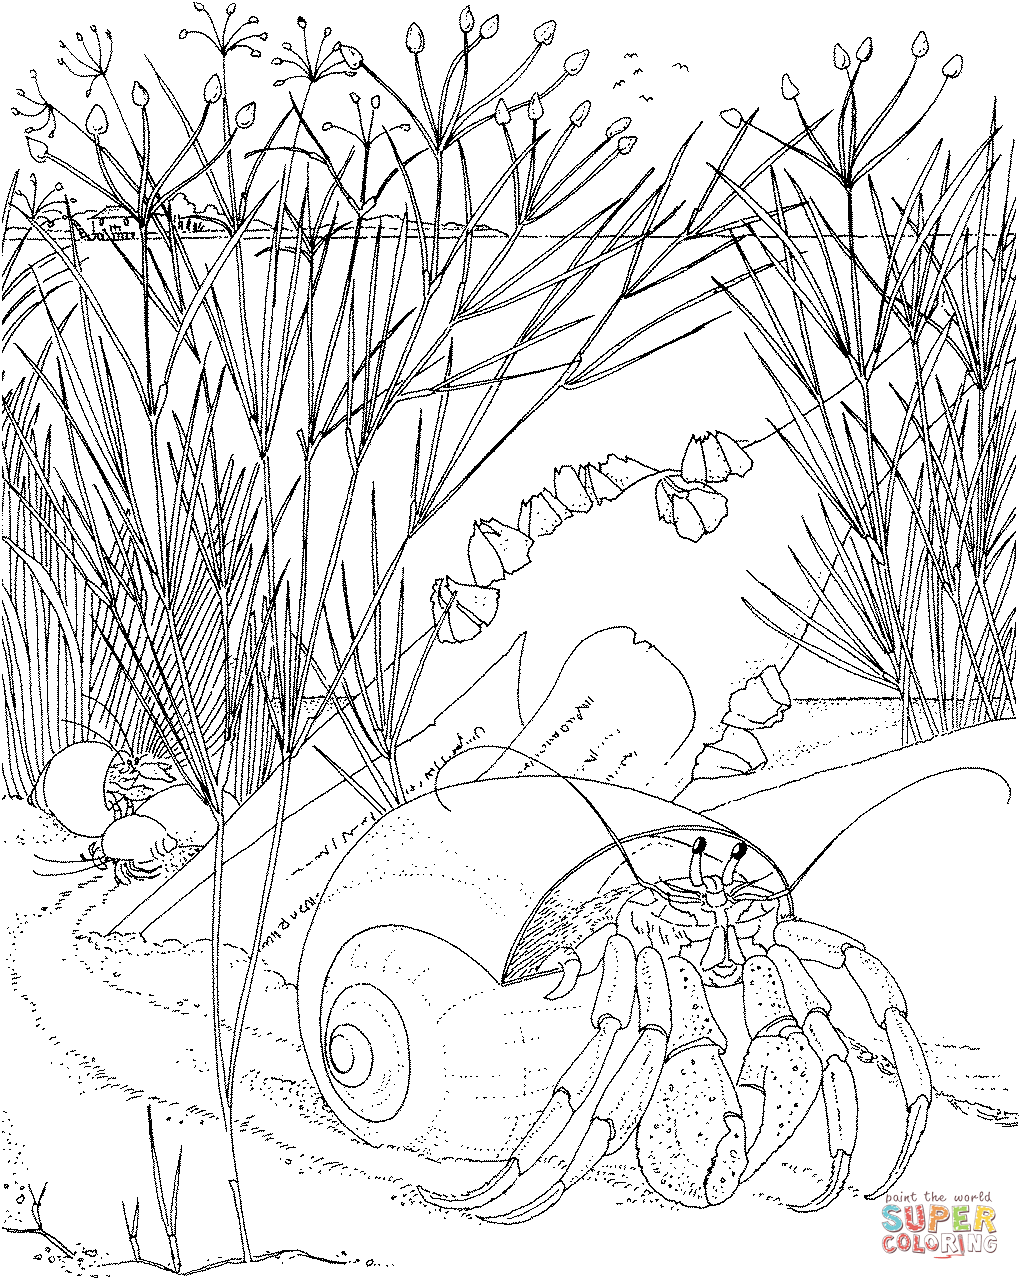 Nocturnal Animals Coloring Pages   Free Printable Pictures ...